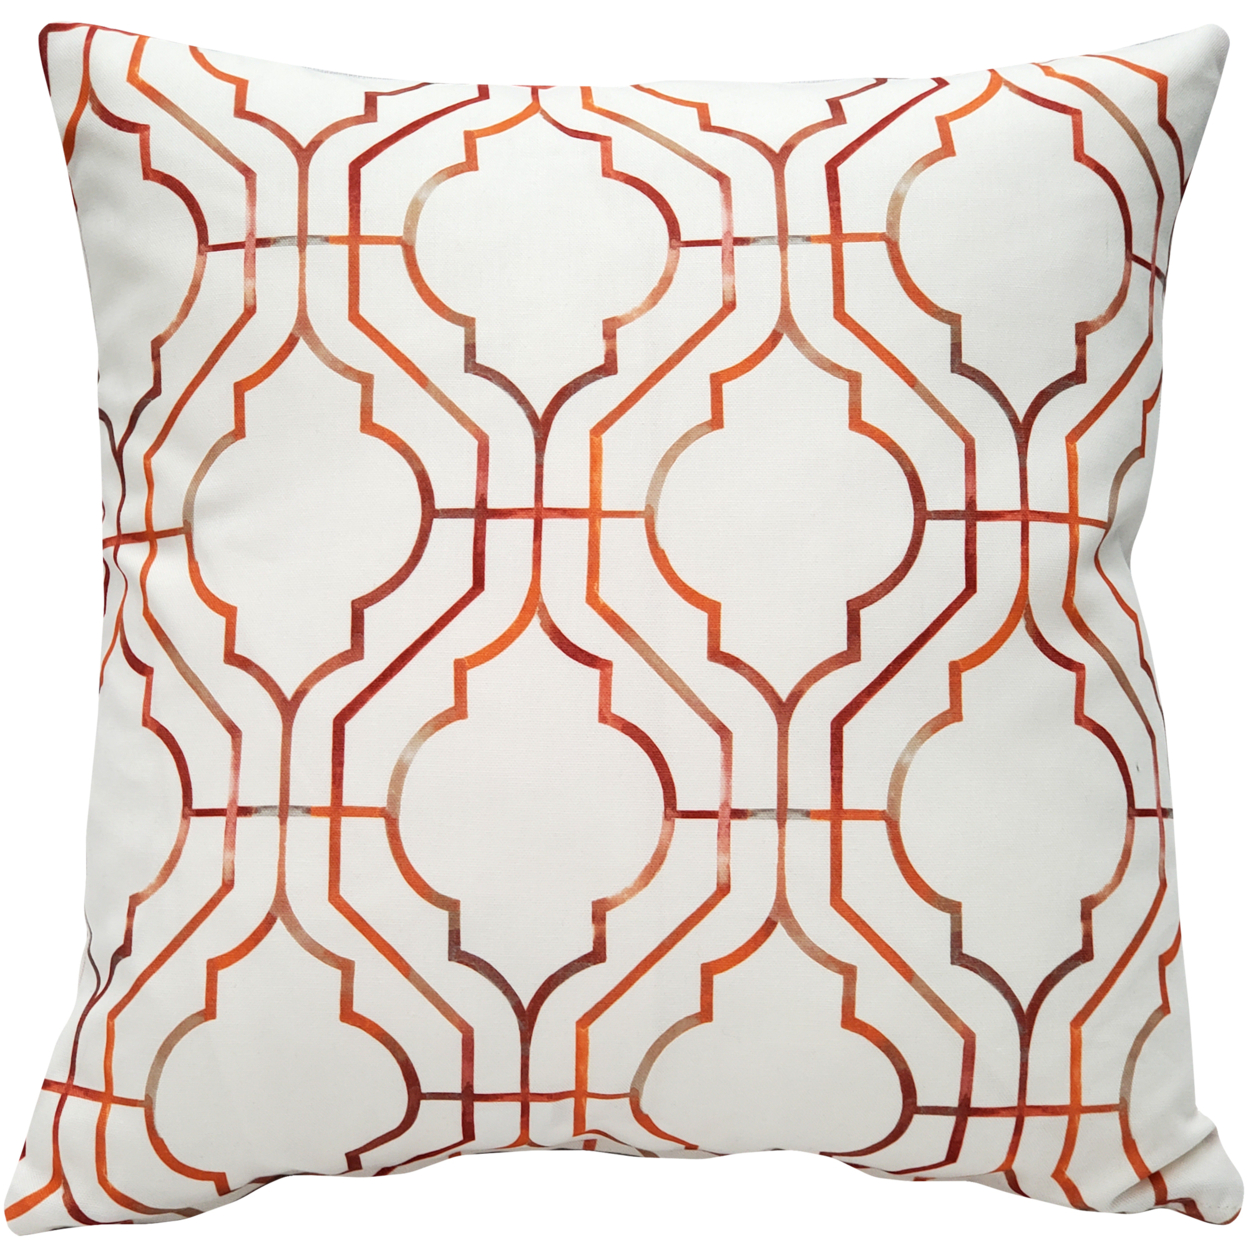 Biltmore Gate Orange Throw Pillow 20x20 Inches Square, Complete Pillow with Polyfill Pillow Insert